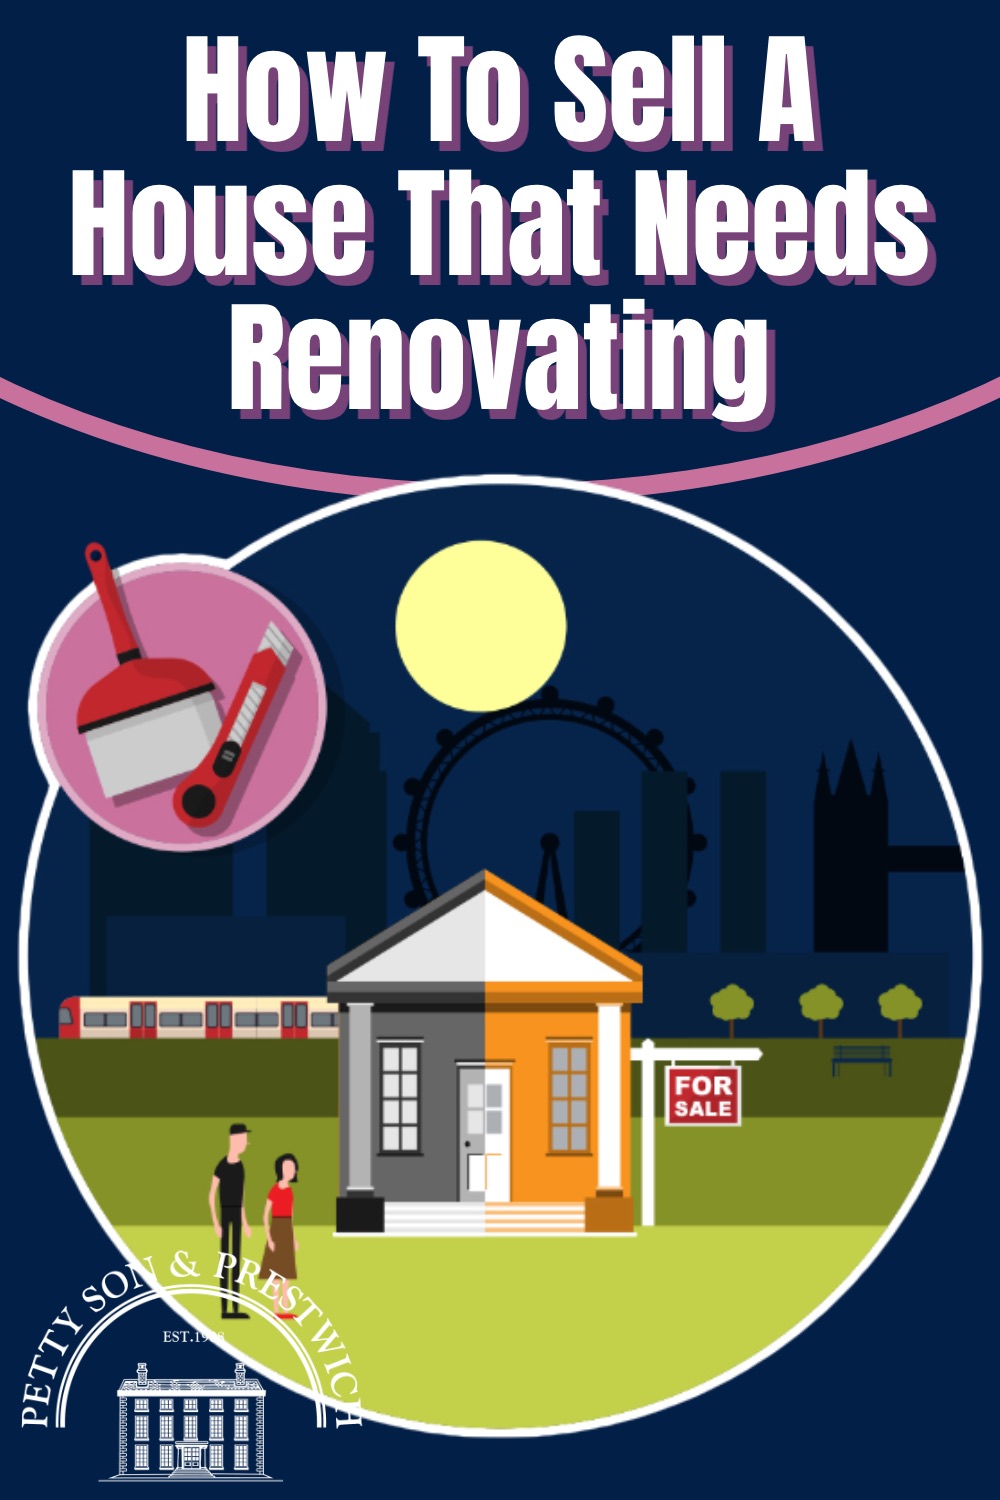 how to sell property that requires renovation.jpg